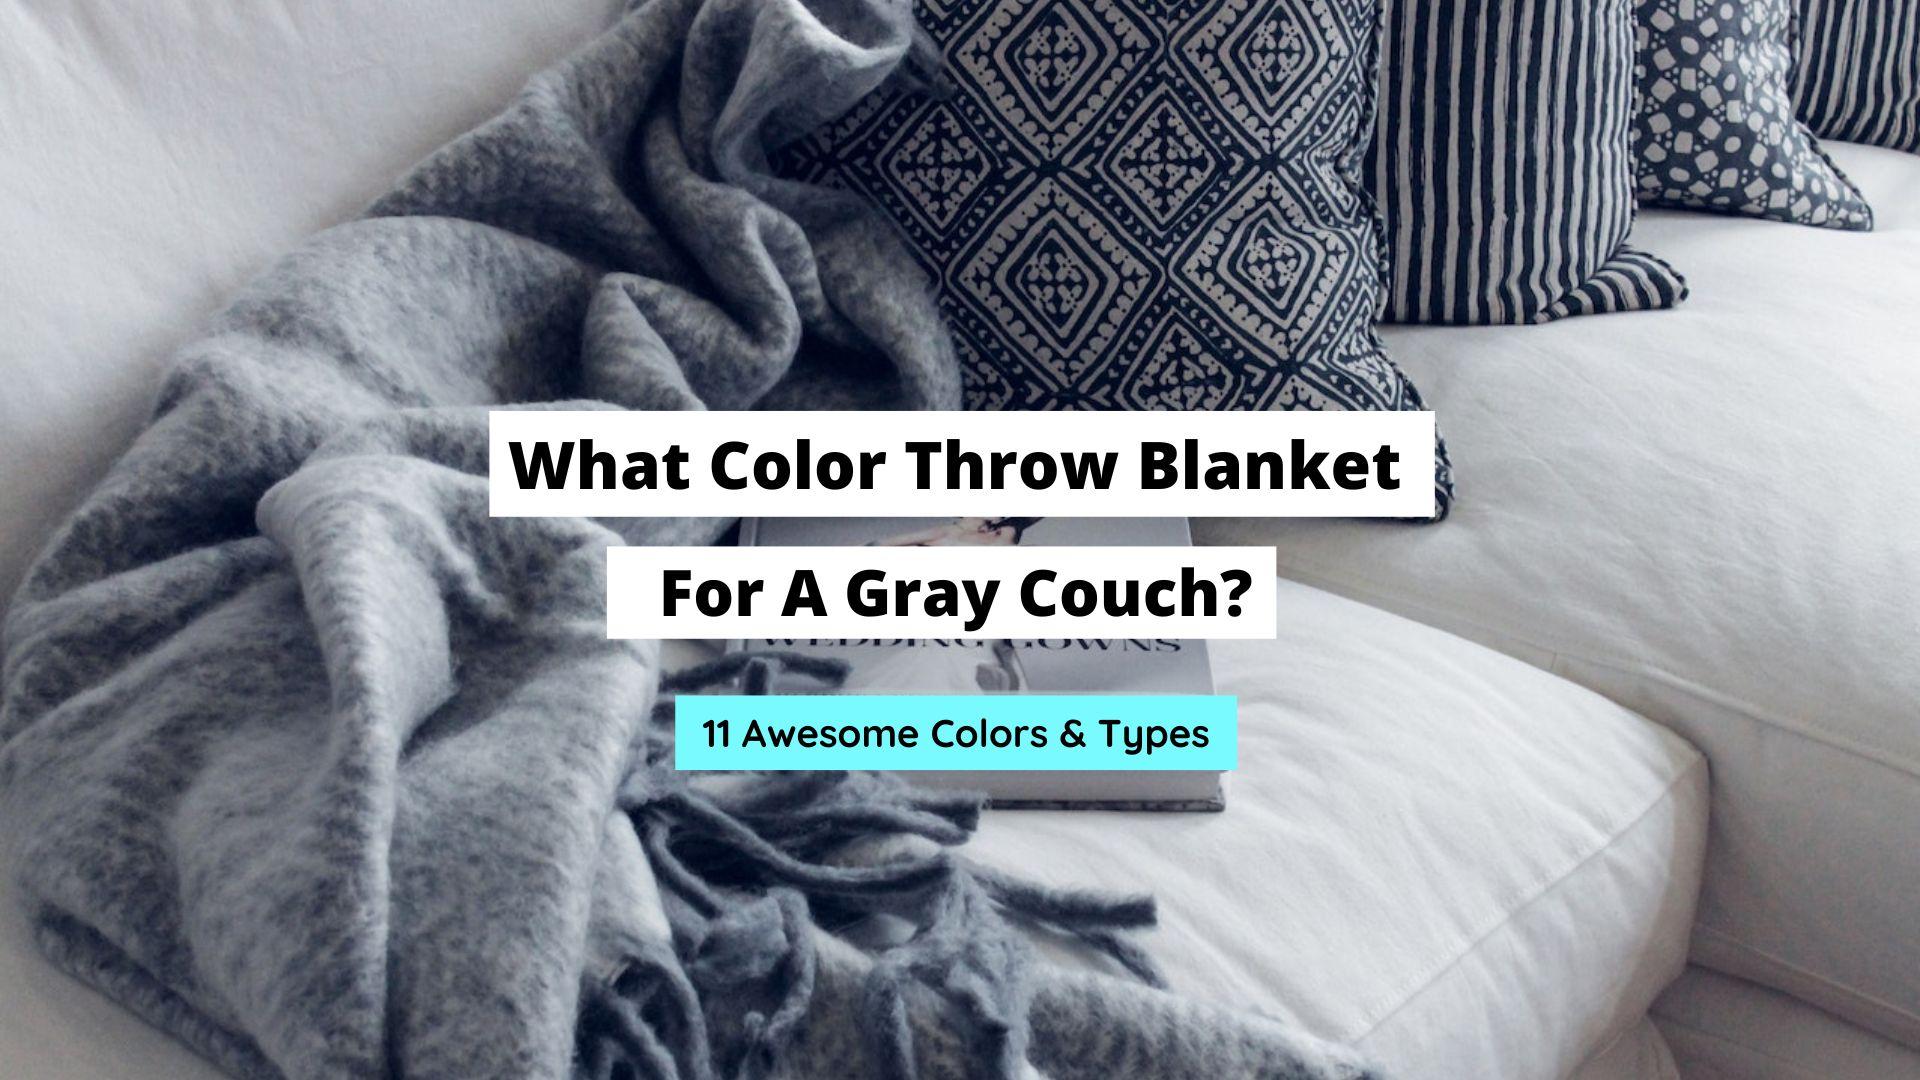 What Color Throw Blanket For A Gray Couch